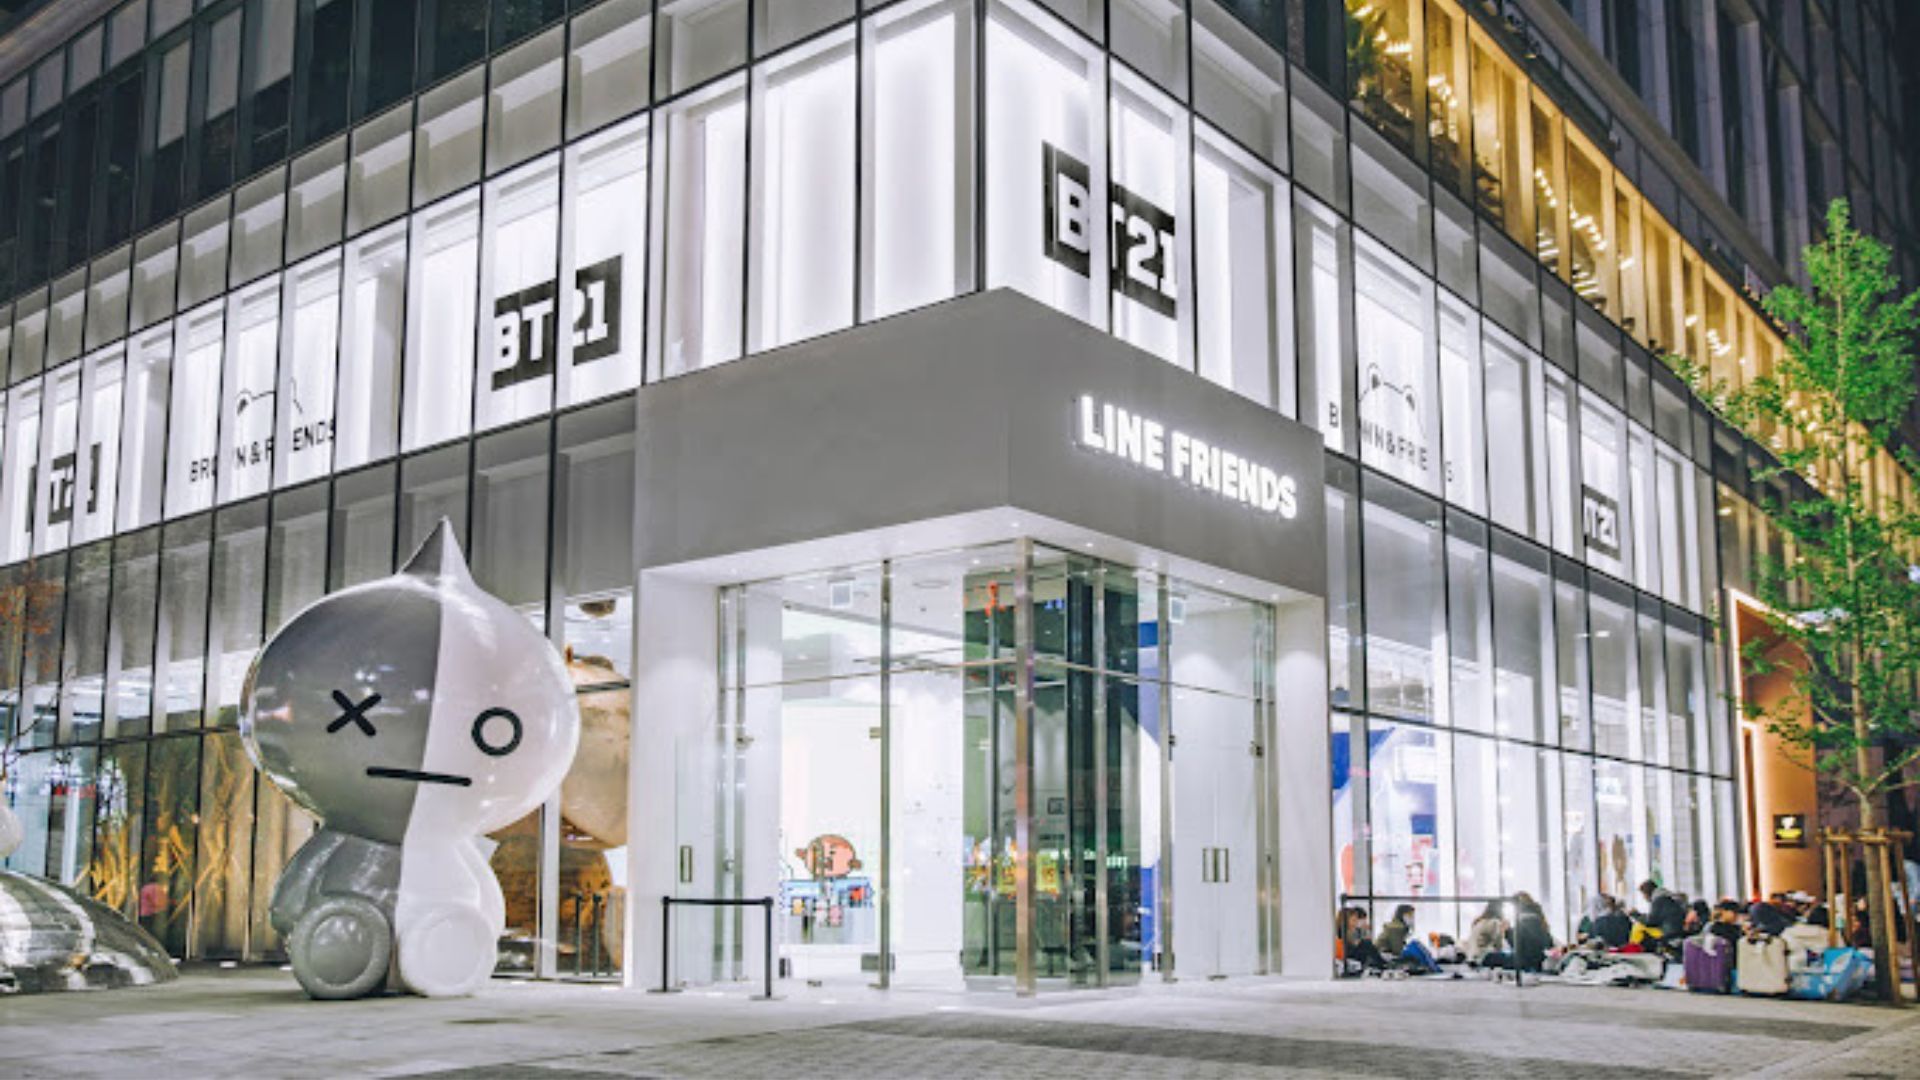 BT21 stores in seoul